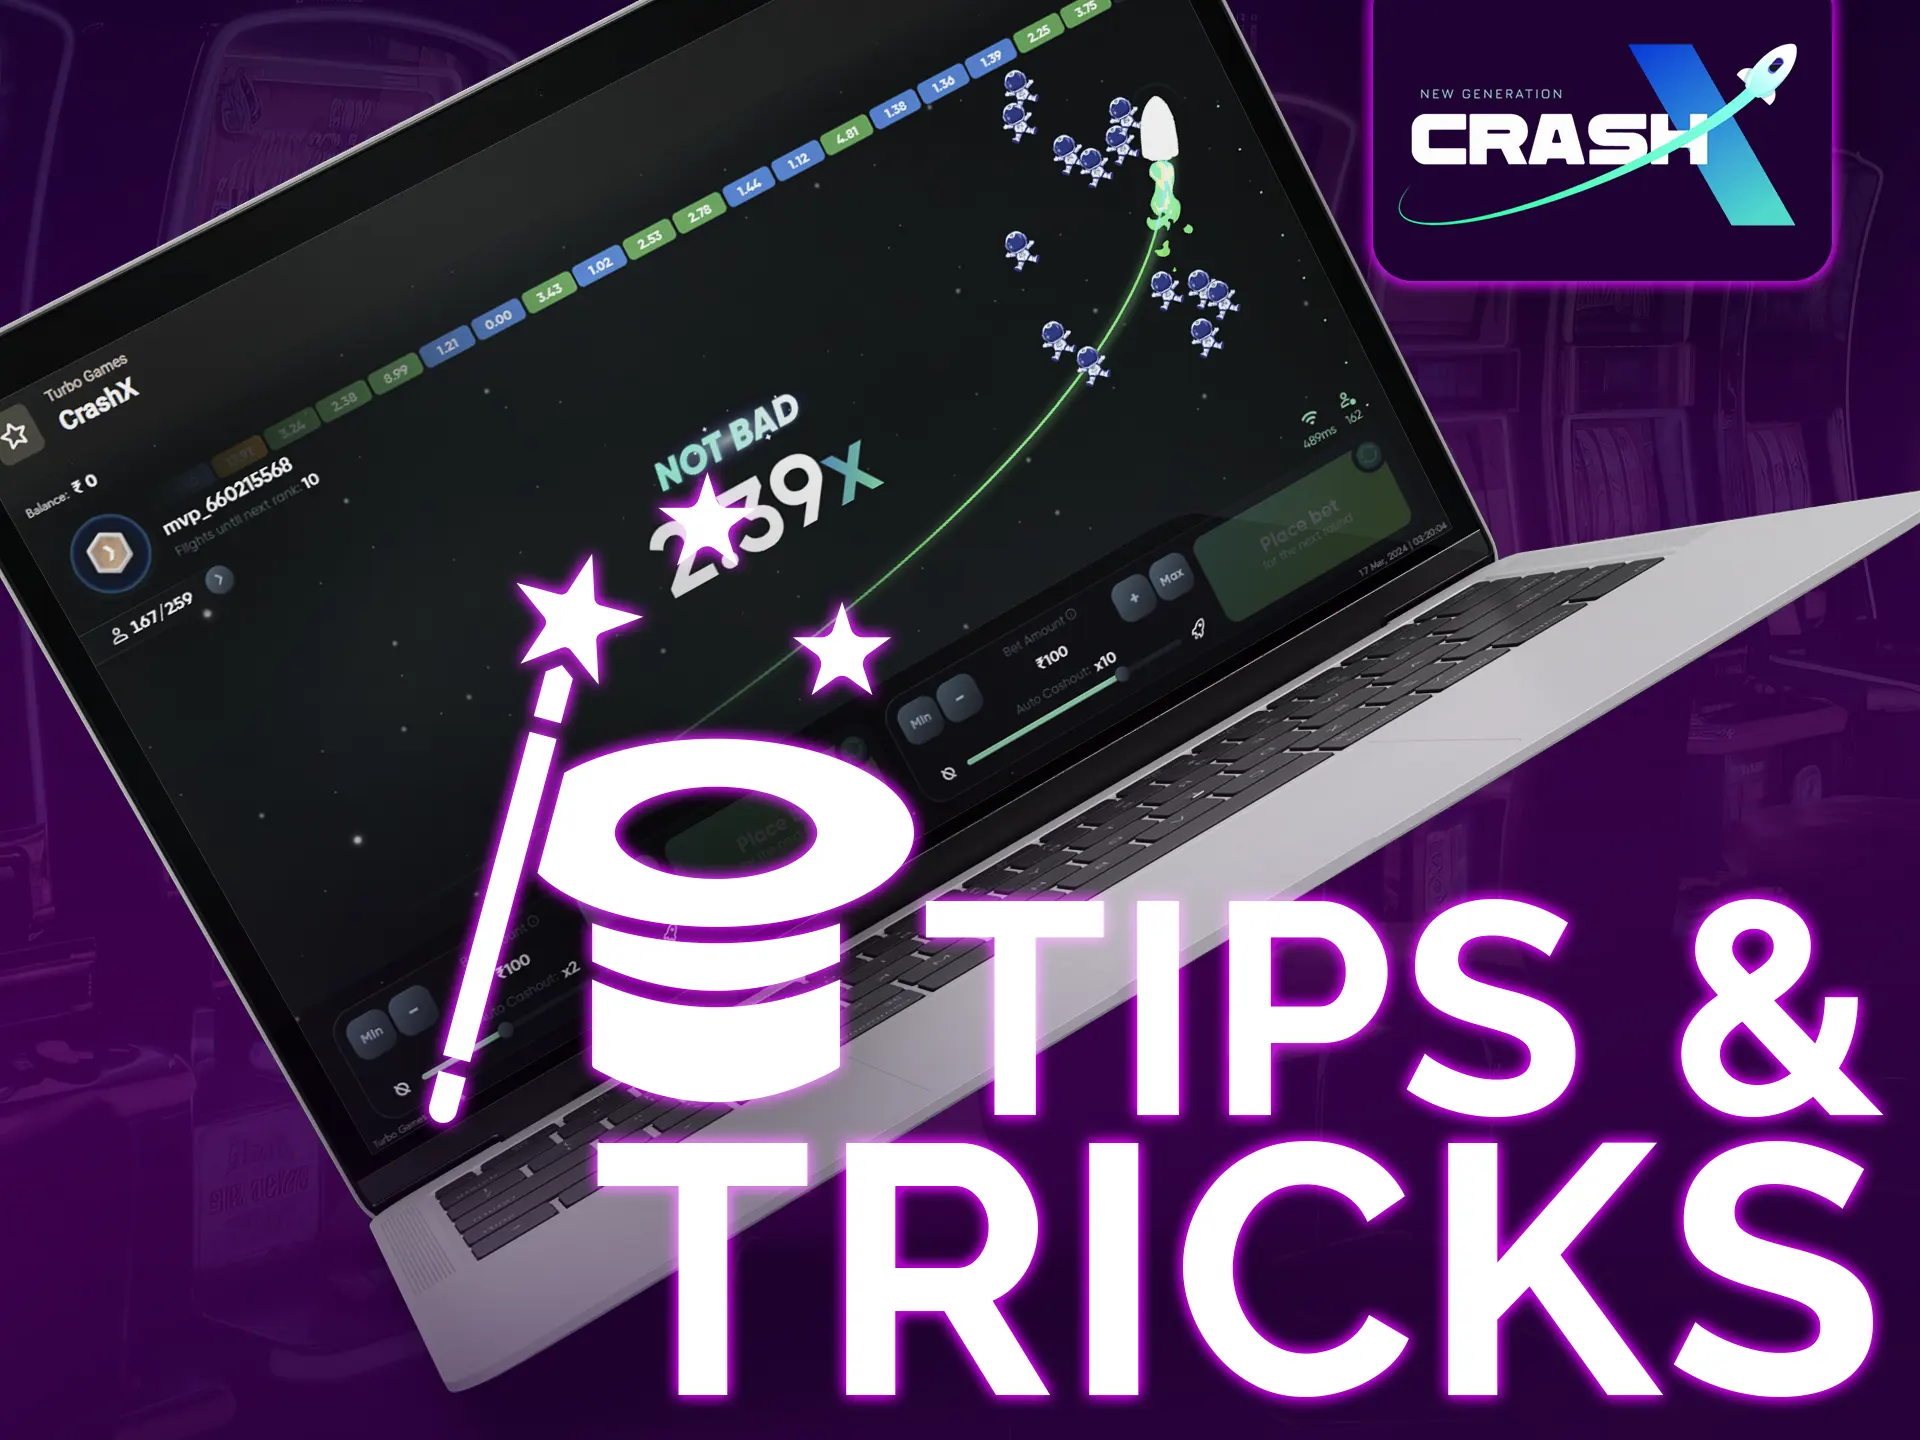 Follow Crash X tips for better gaming experience.